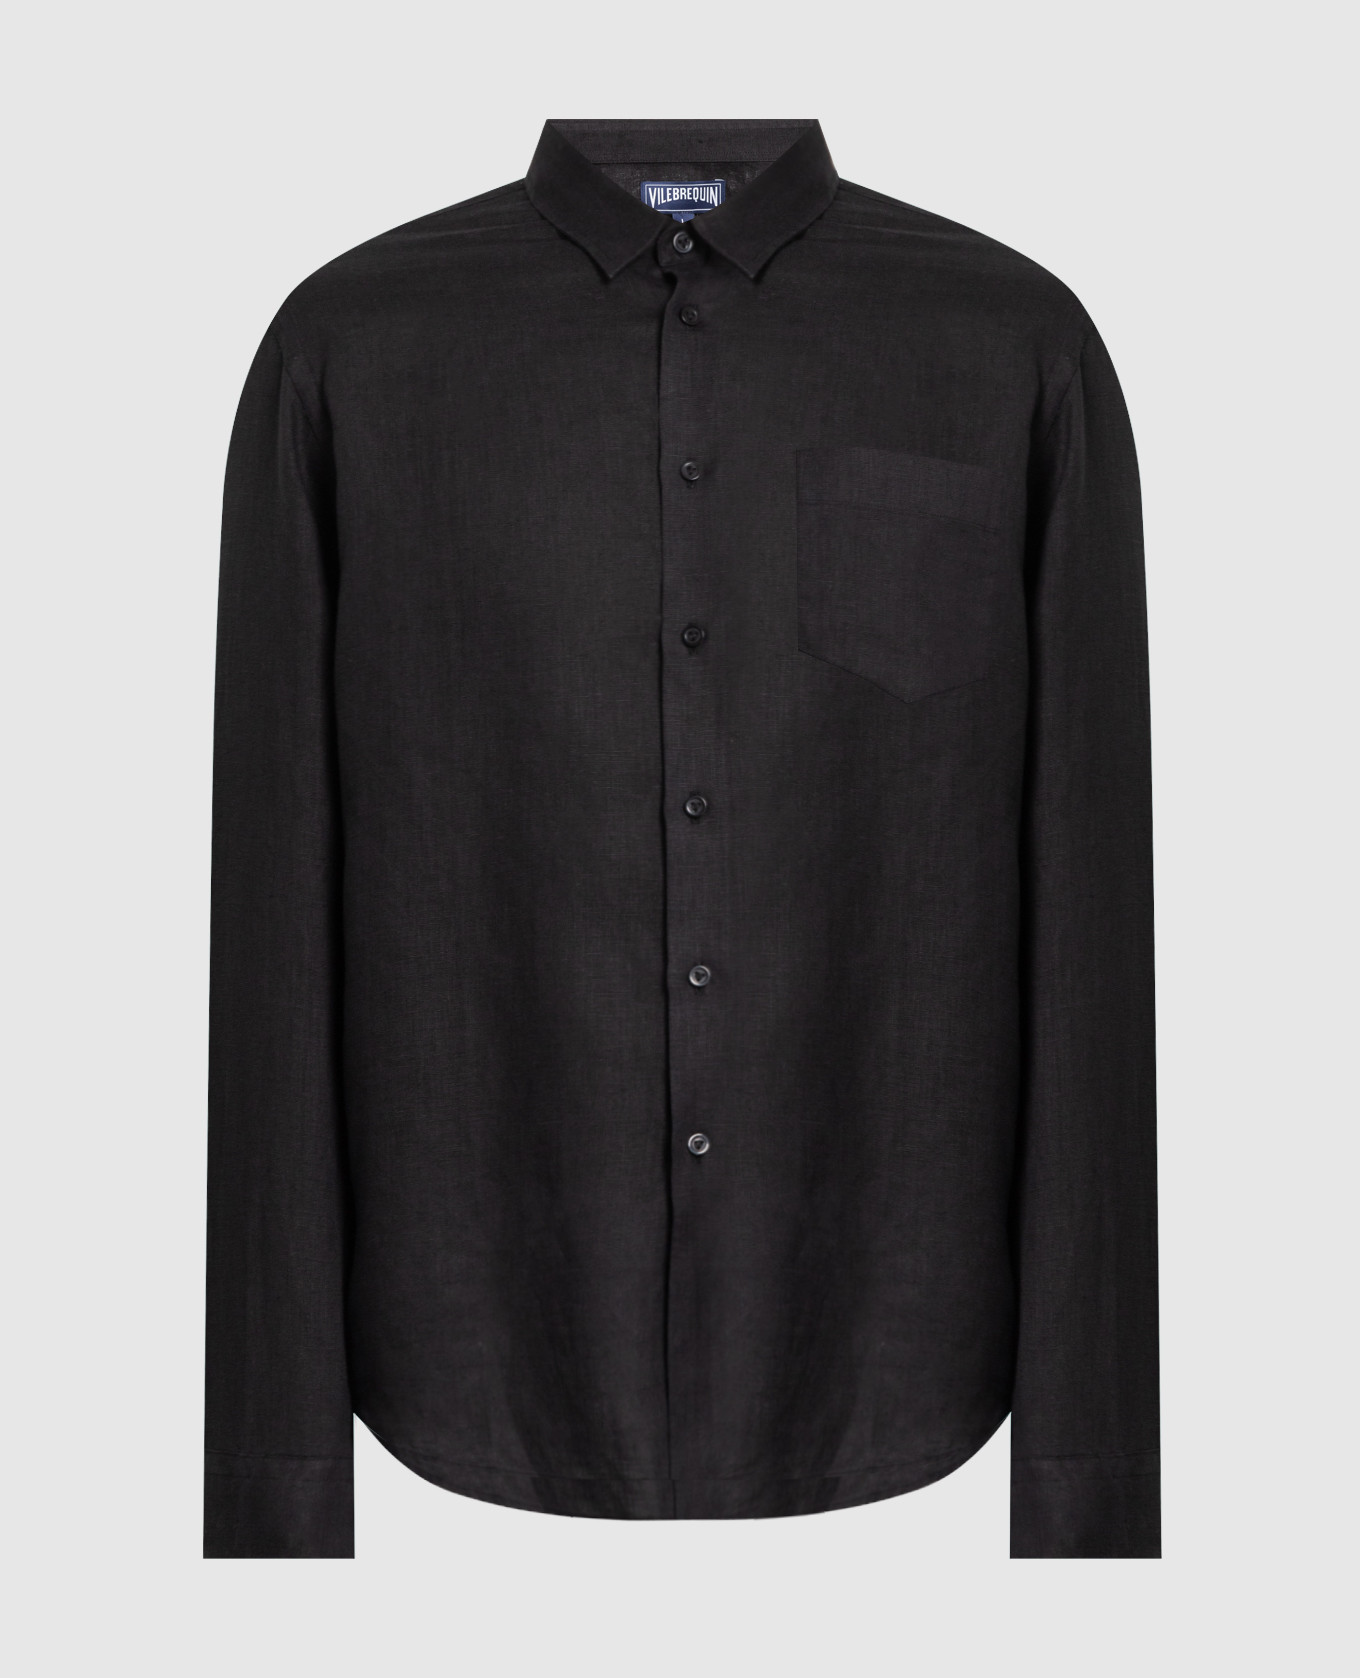 Caroubis black linen shirt with logo embroidery